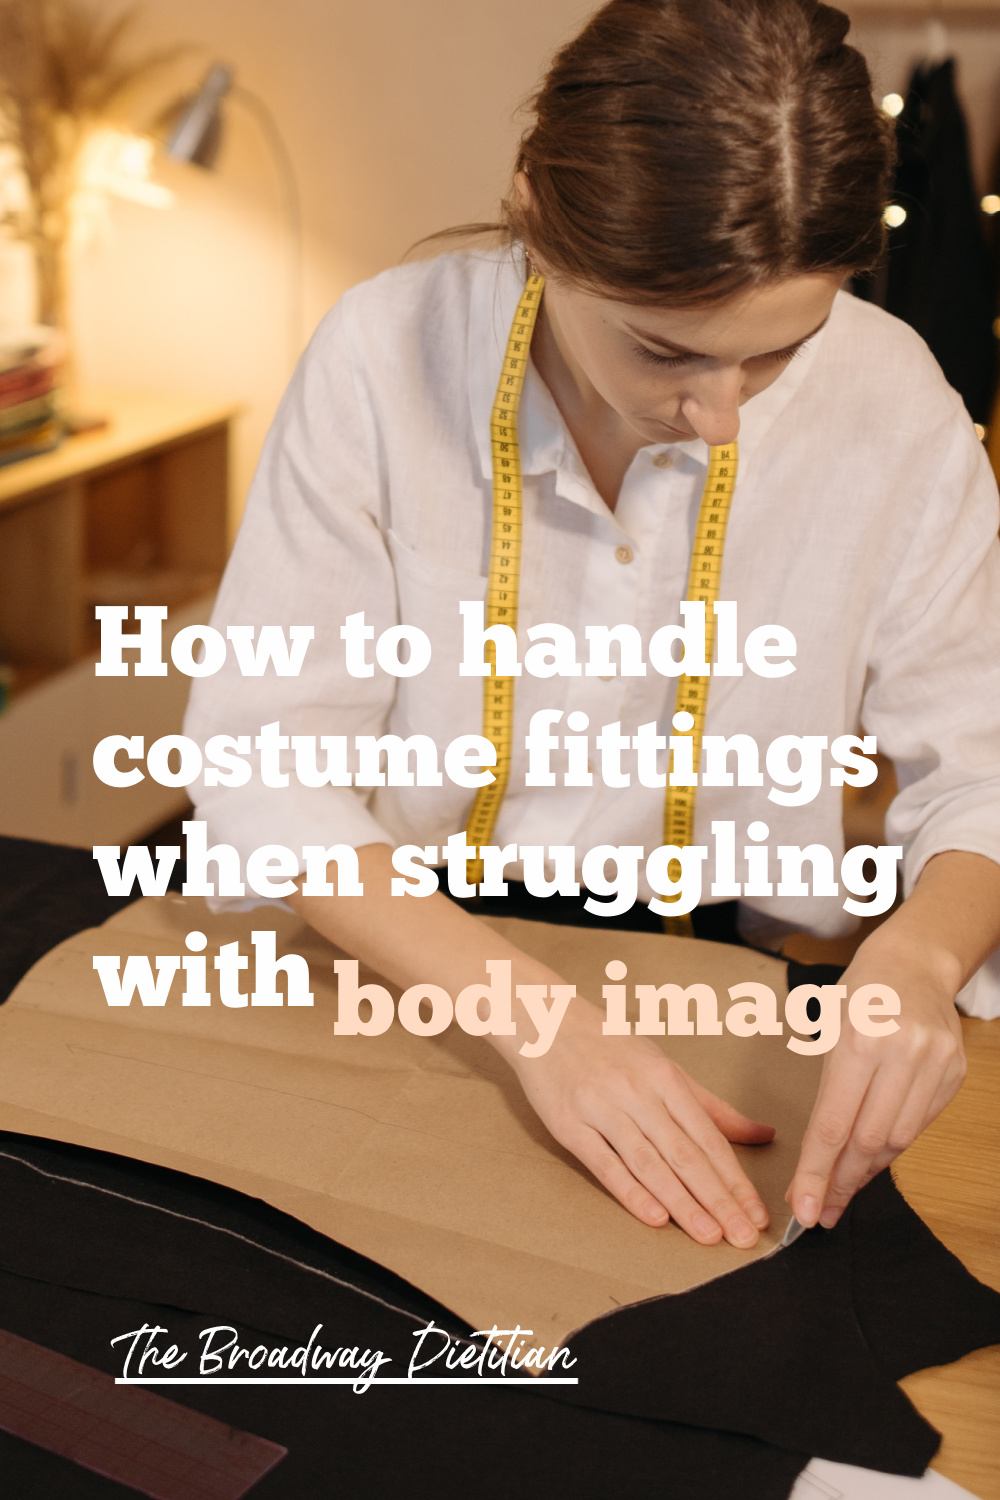 How to handle costume fittings when struggling with body image